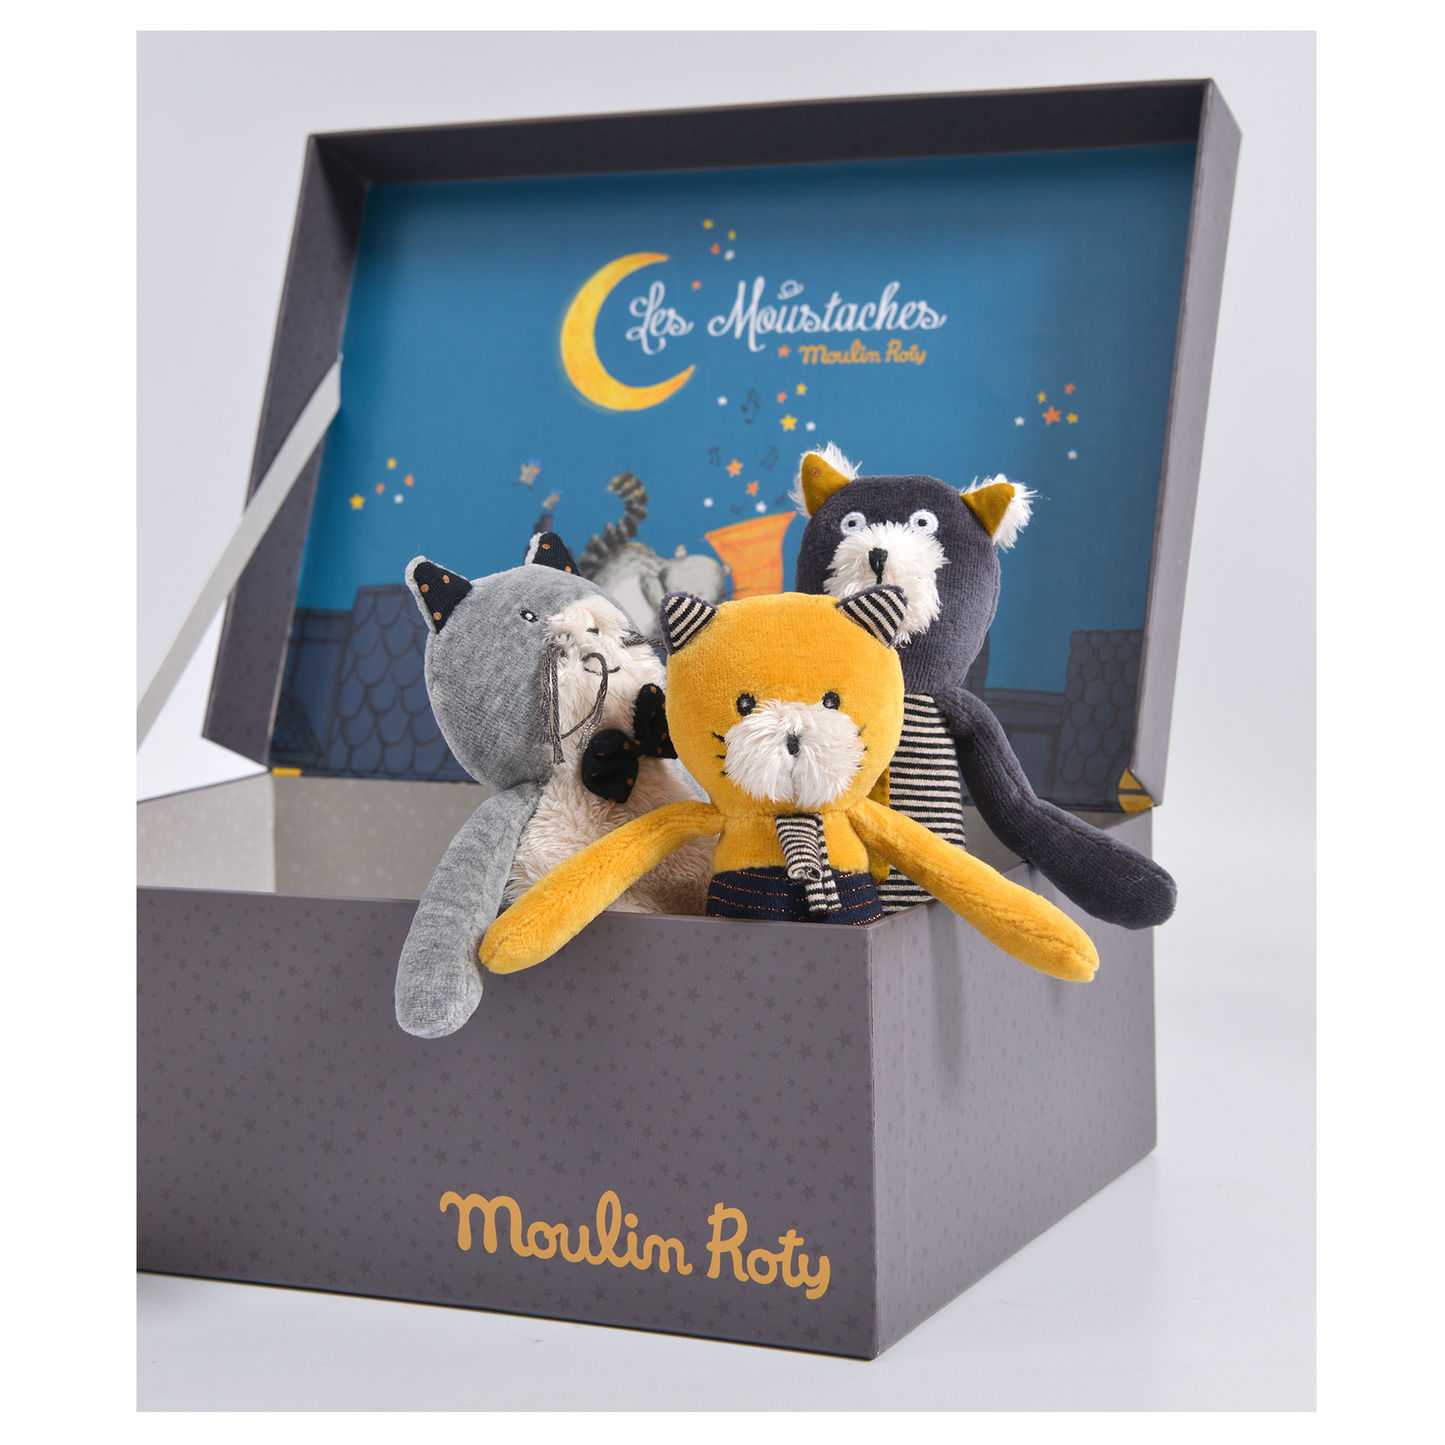 Meet Petitie Alphonse! Part of the Moustaches family, perfect for a snuggle. These small cute cats are safe for newborns.